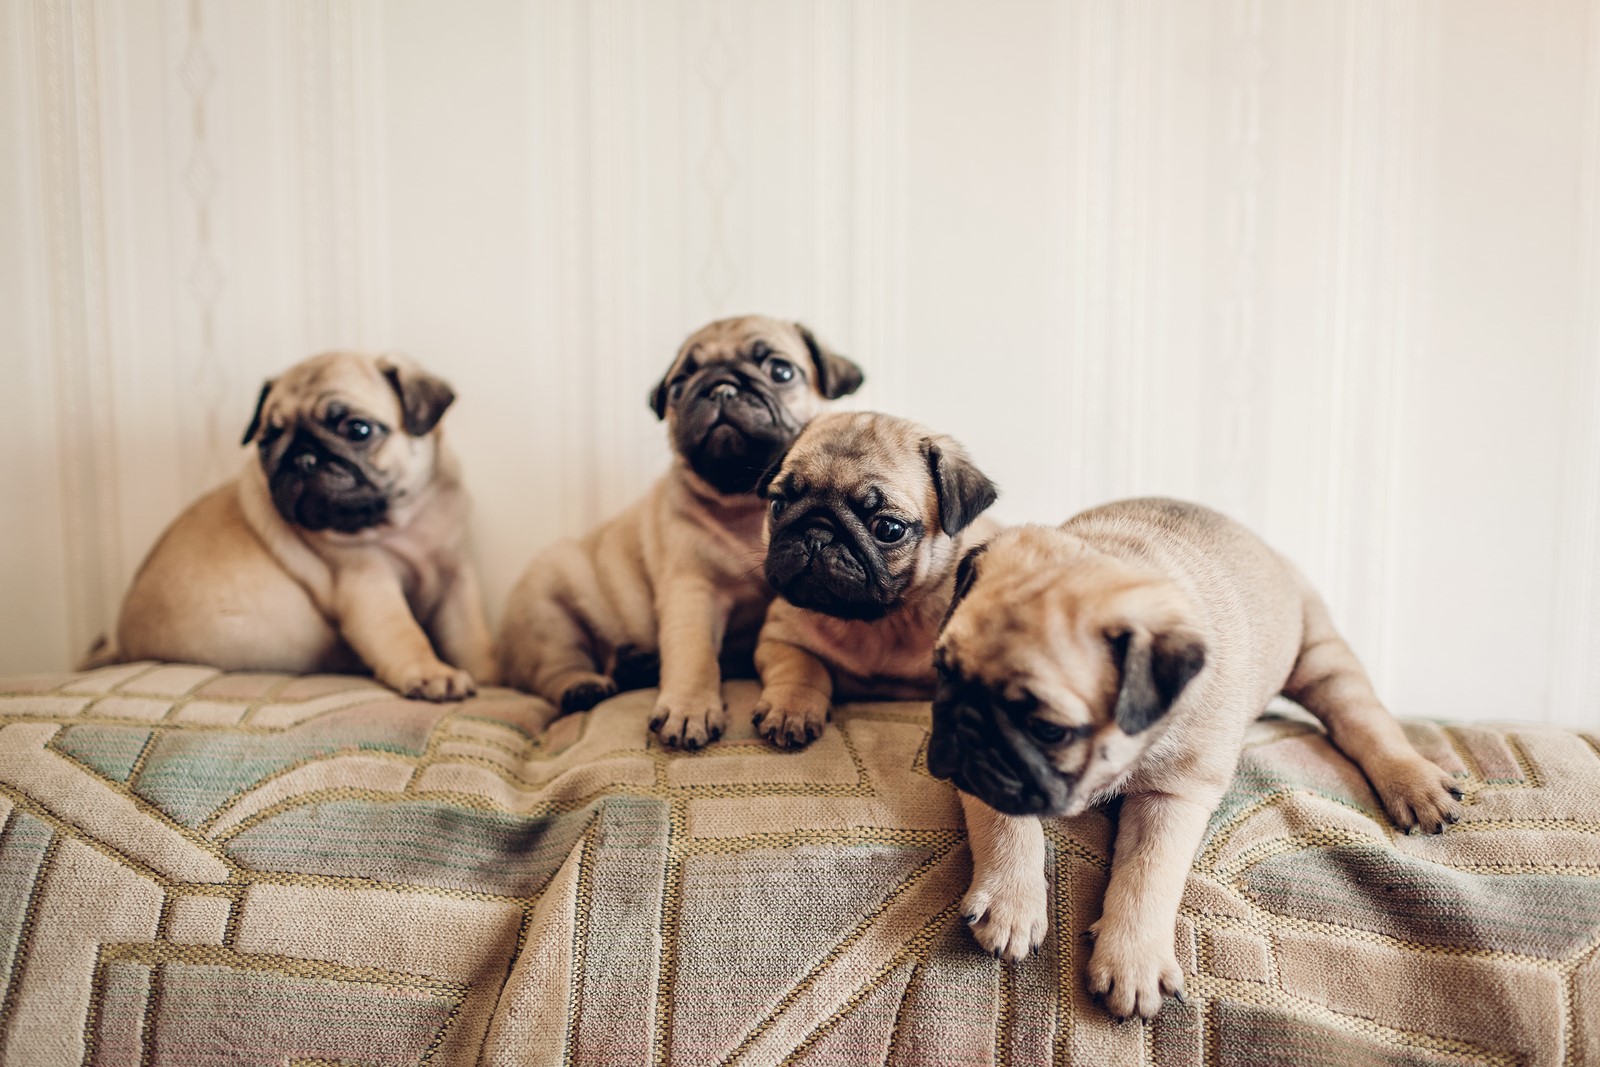 Dog Breeds 101: Things a Brachycephalic Breed Owner Needs to Know